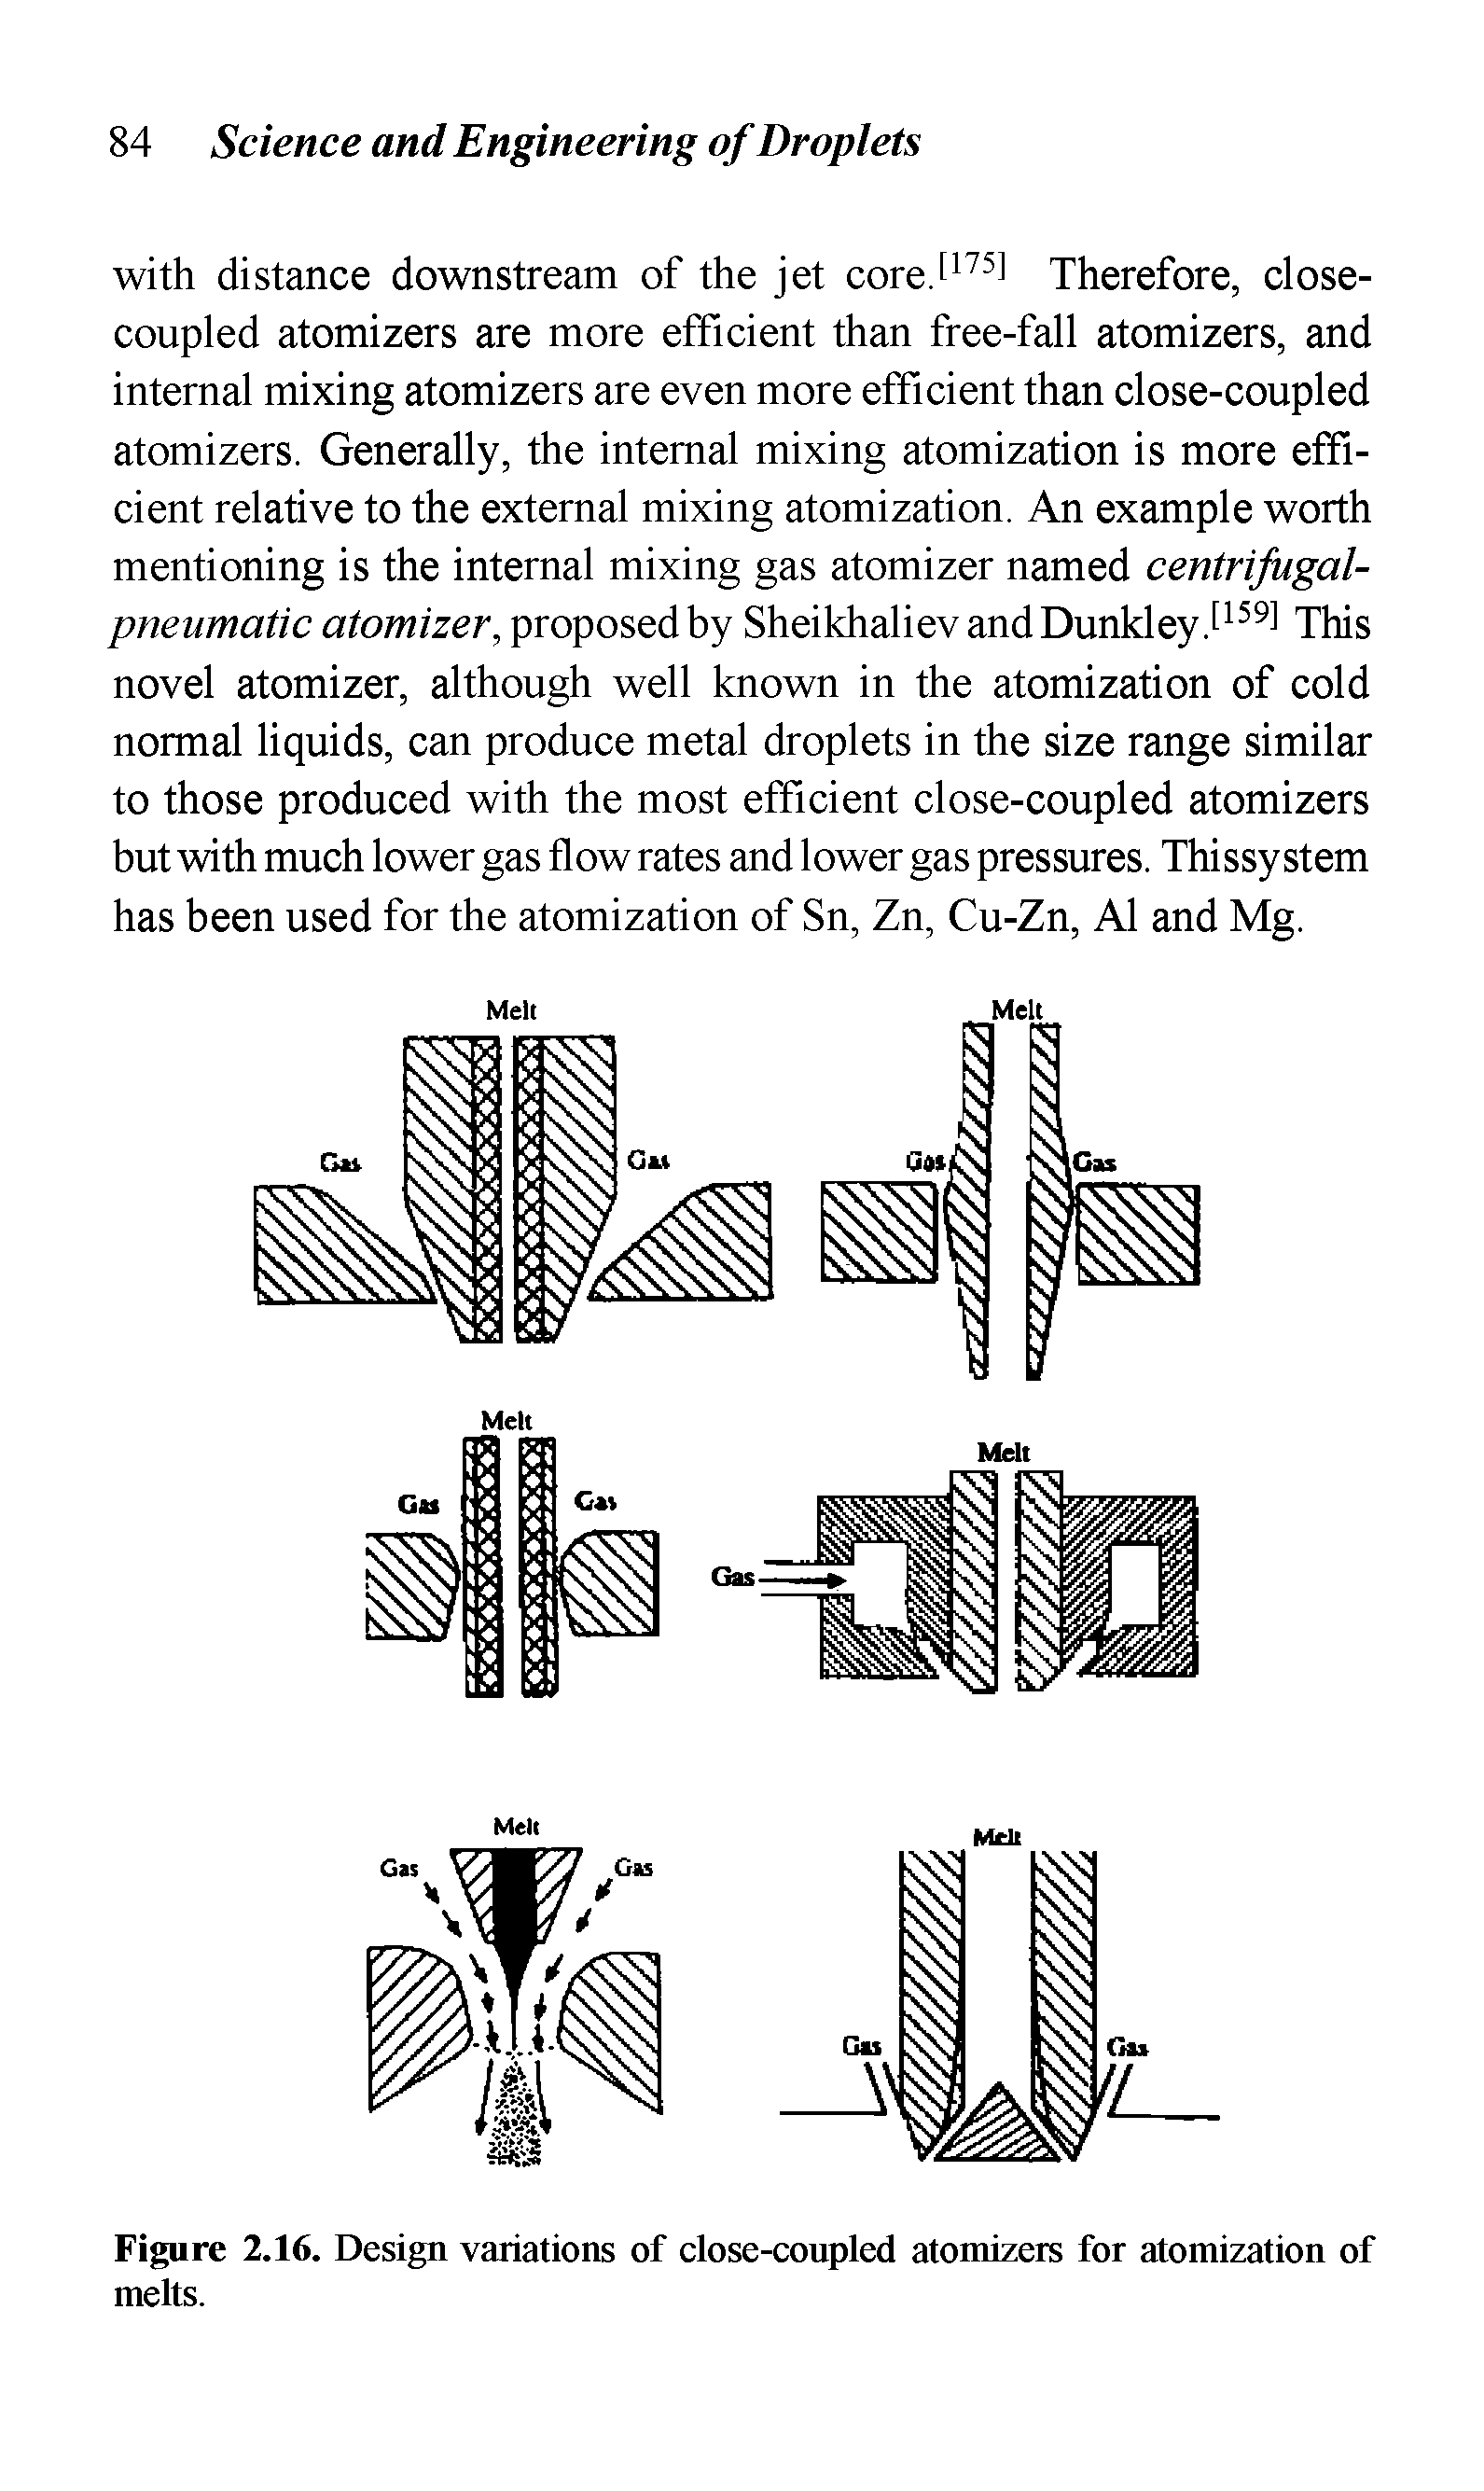 Figure 2.16. Design variations of close-coupled atomizers for atomization of melts.